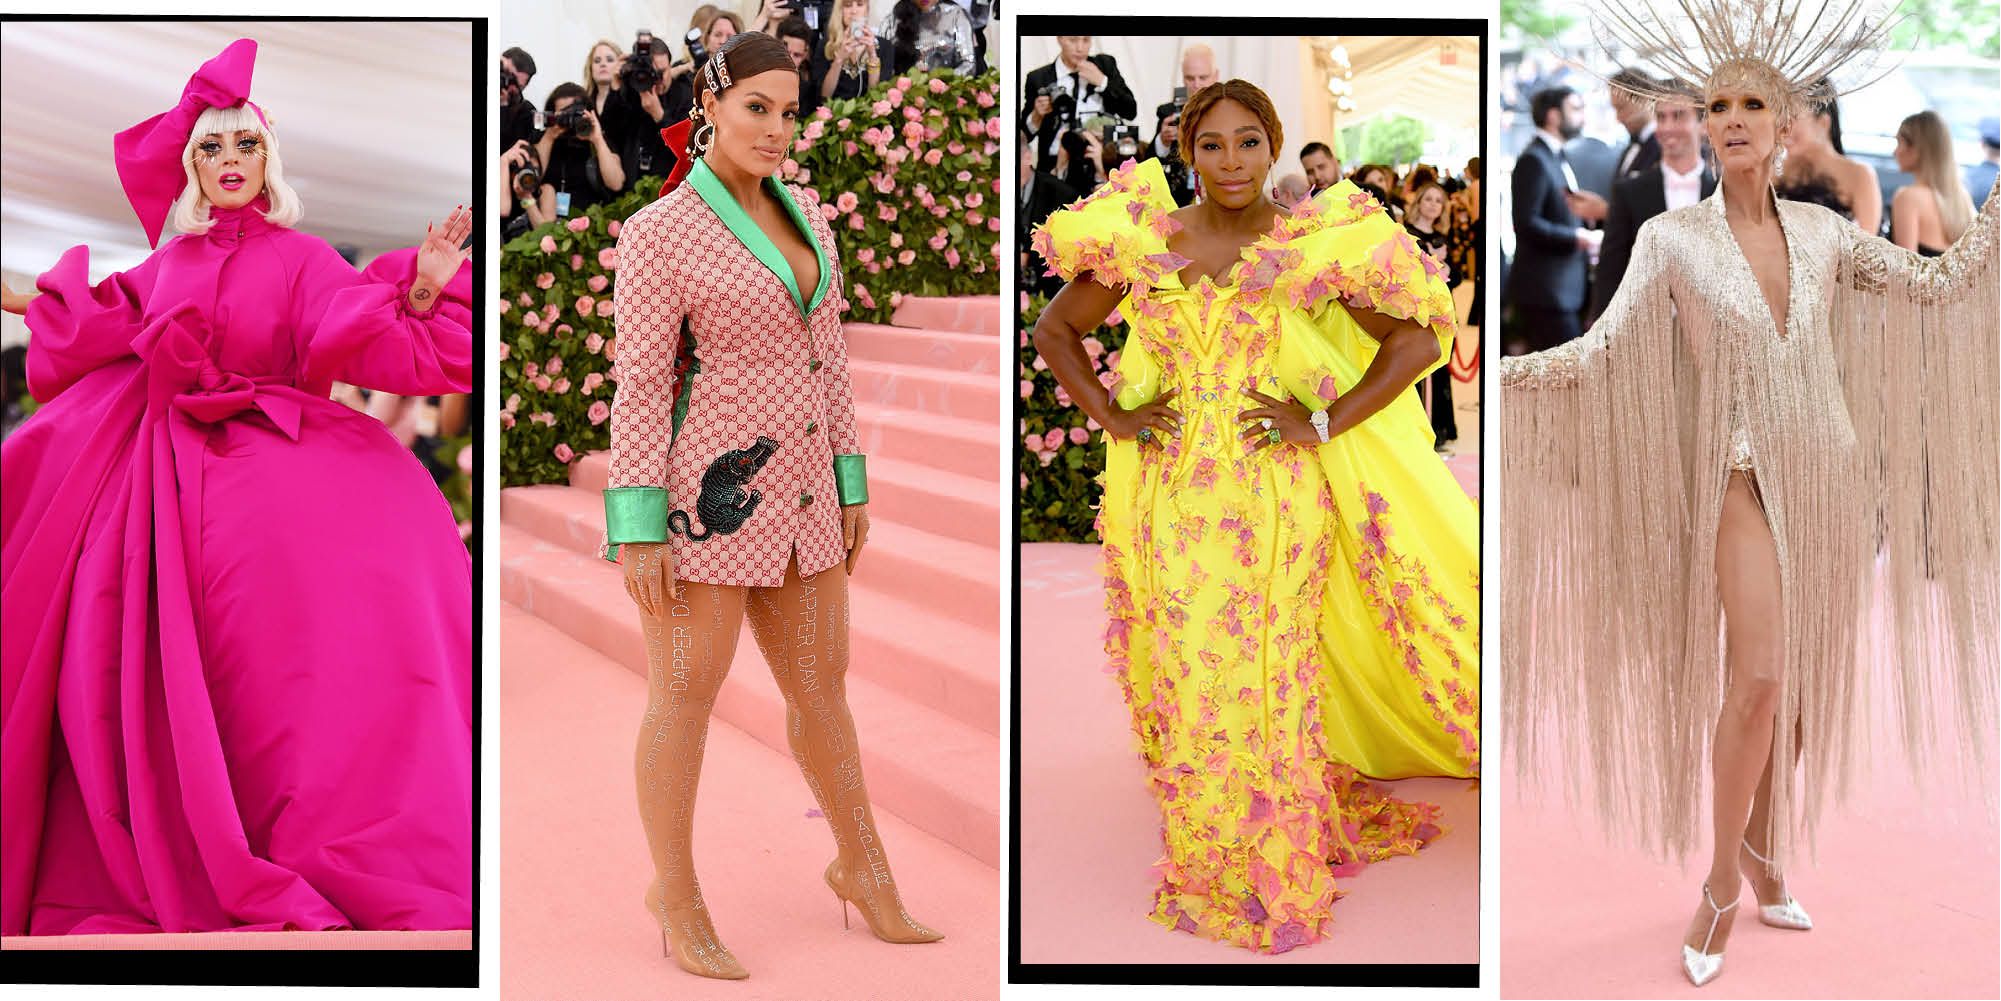 A Crowd-Sourced Guide To 'Camp' In 2019, According To Met Gala Attendees